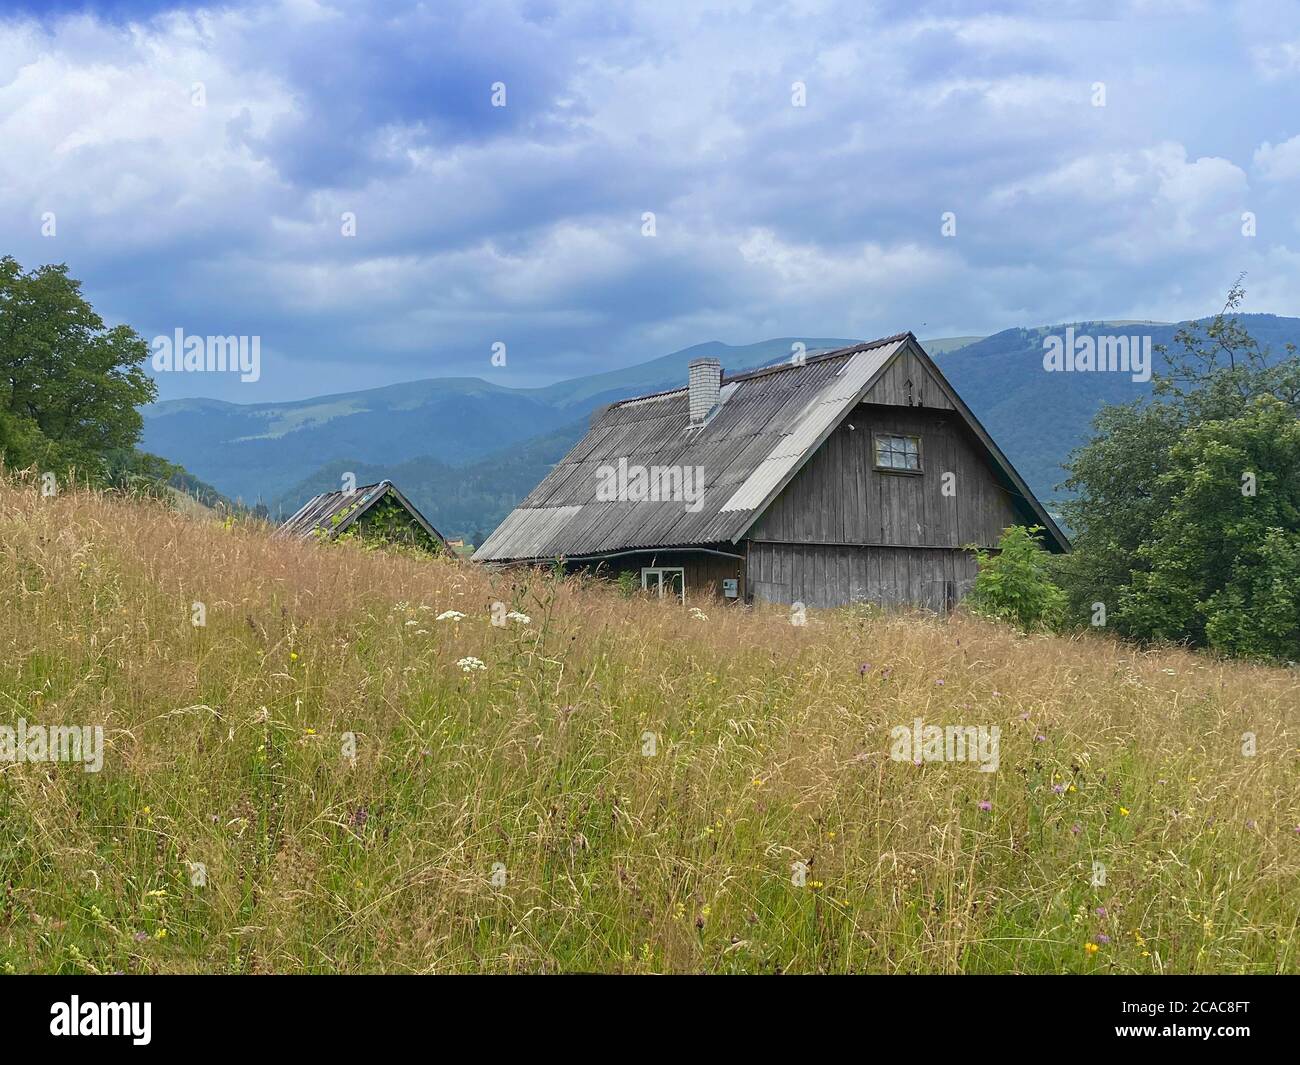 Old traditional wooden house in Carpathian mountains, Ukraine Stock Photo